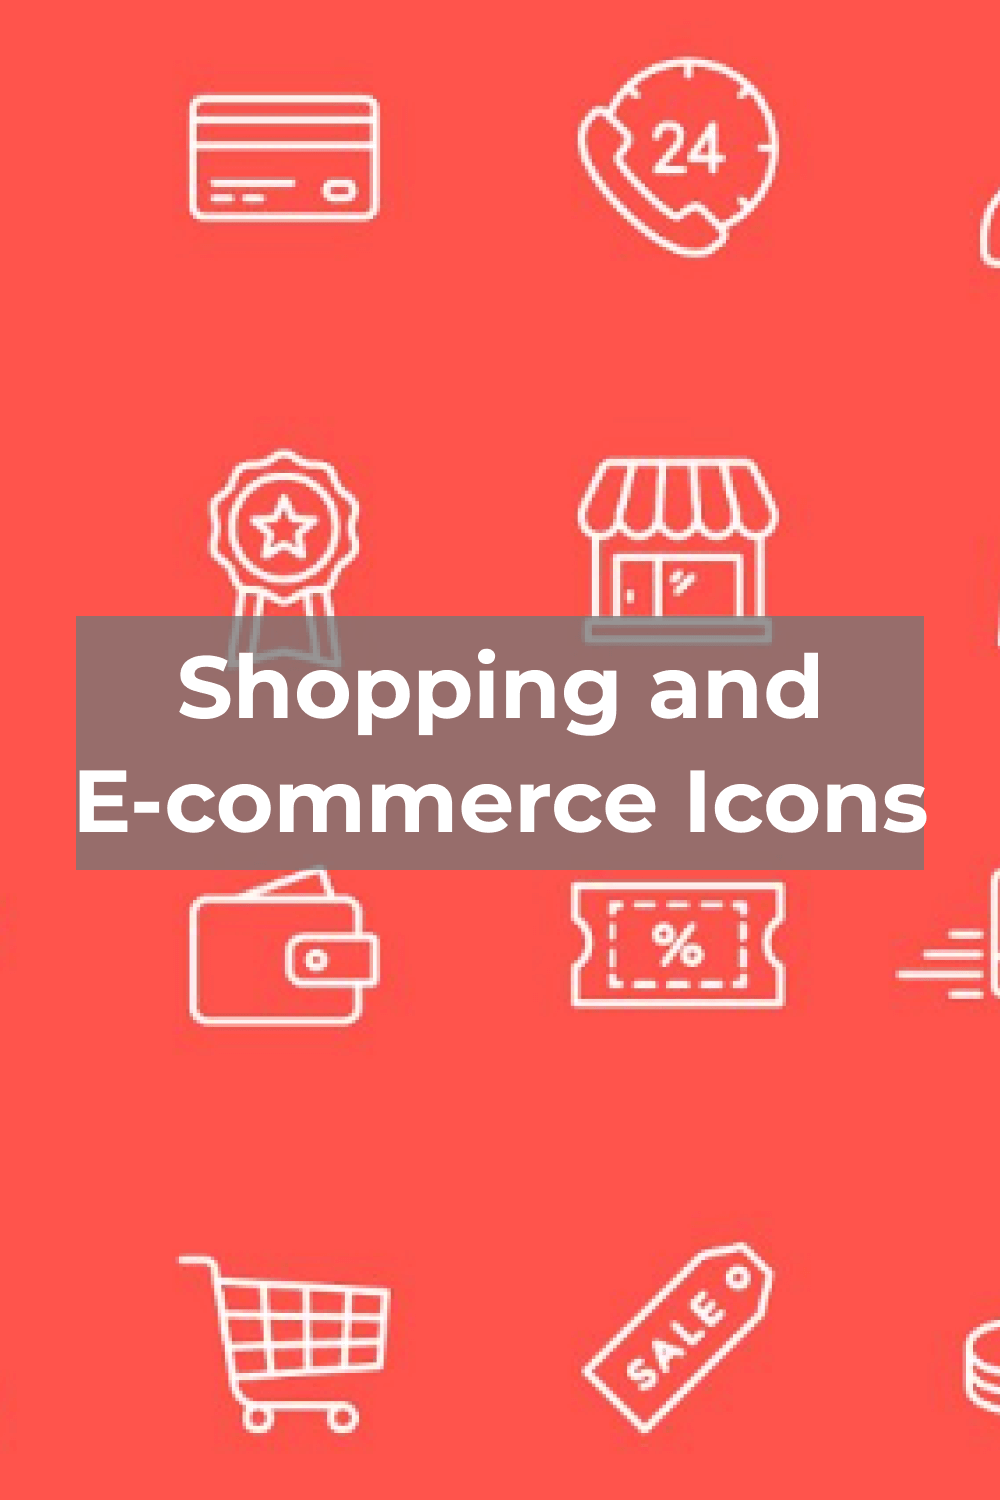 Big Shopping and E-commerce Icons.